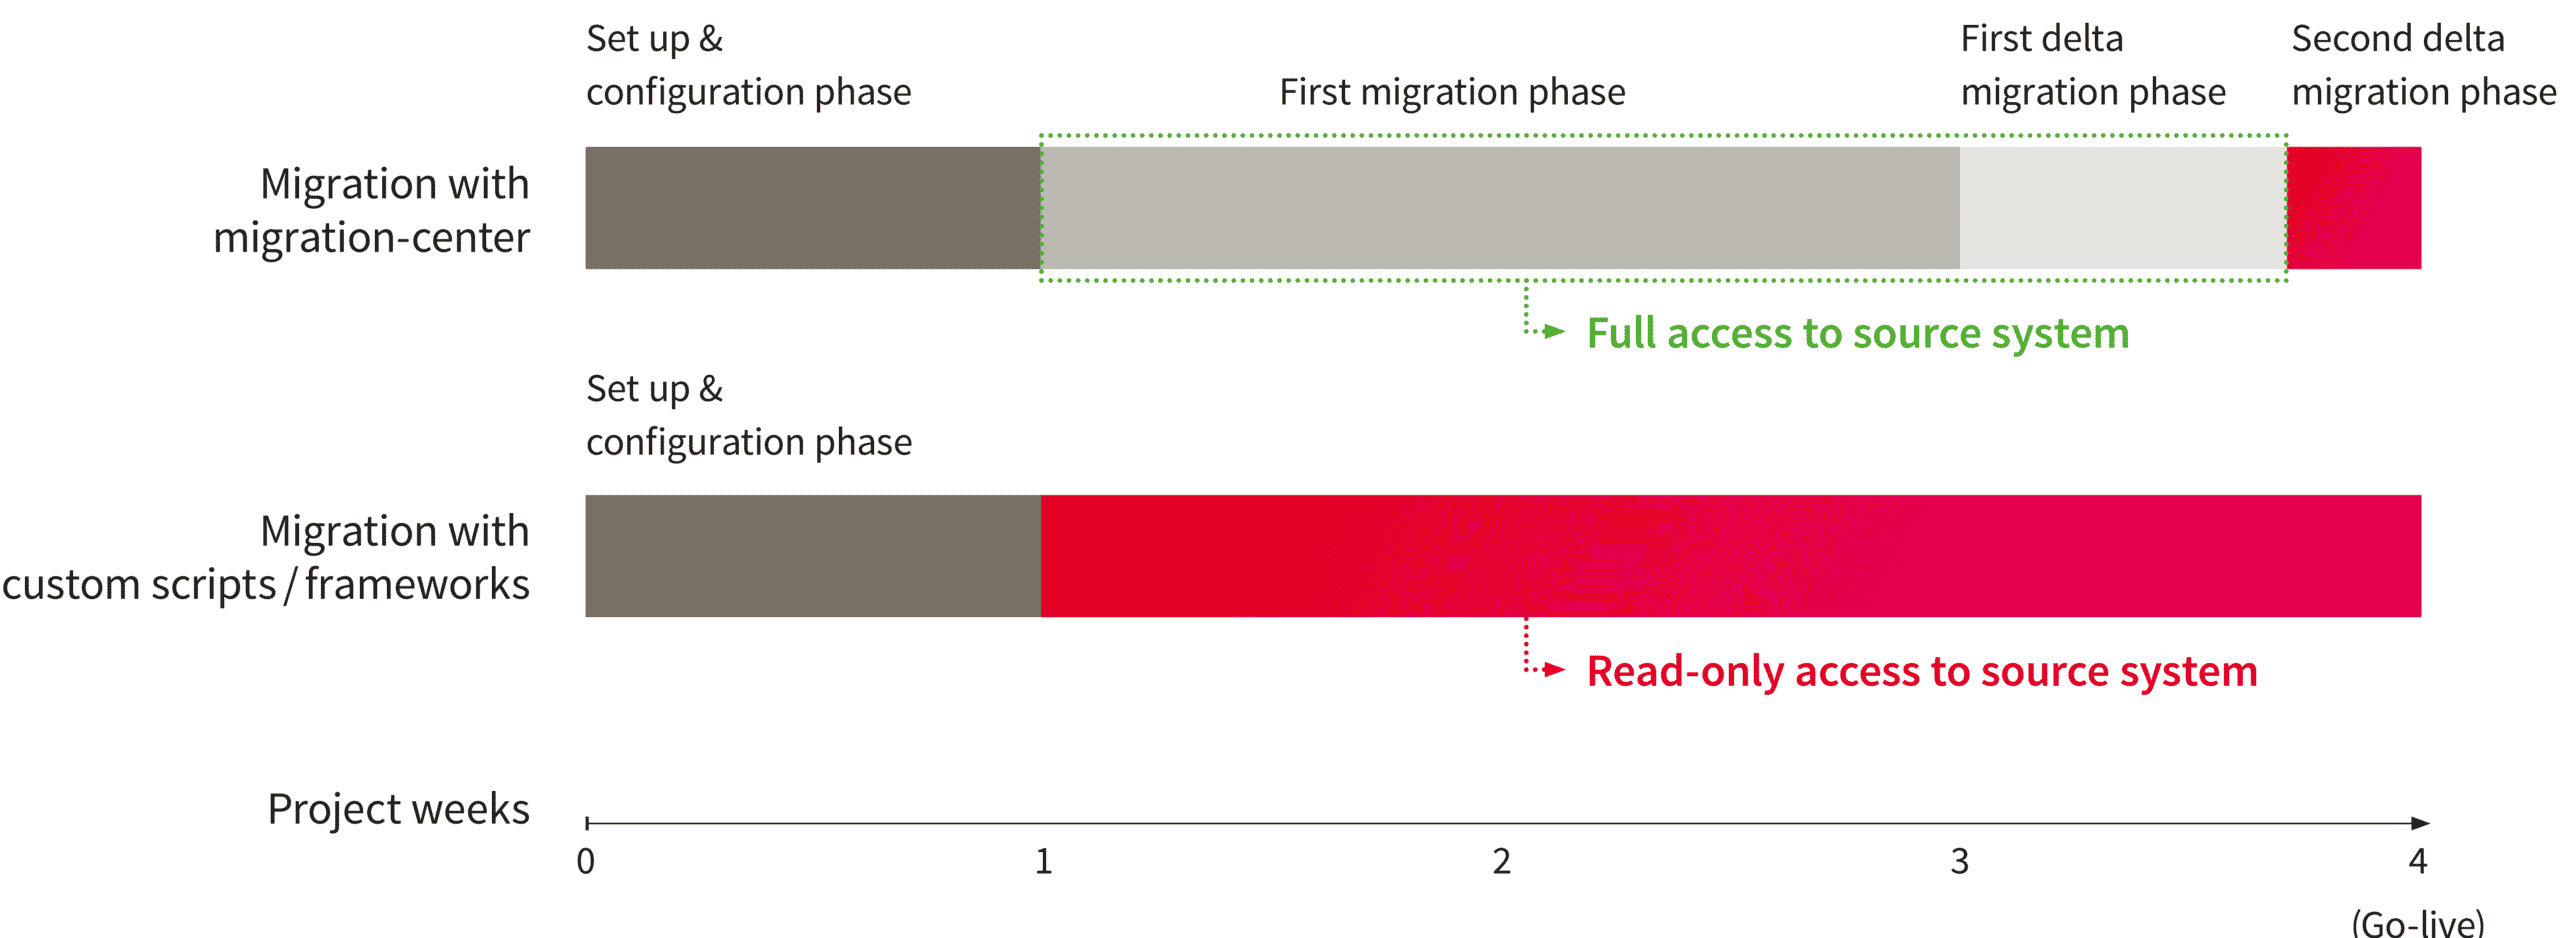 02 | Blogpost | Delta migrations: How to avoid downtimes during data migrations